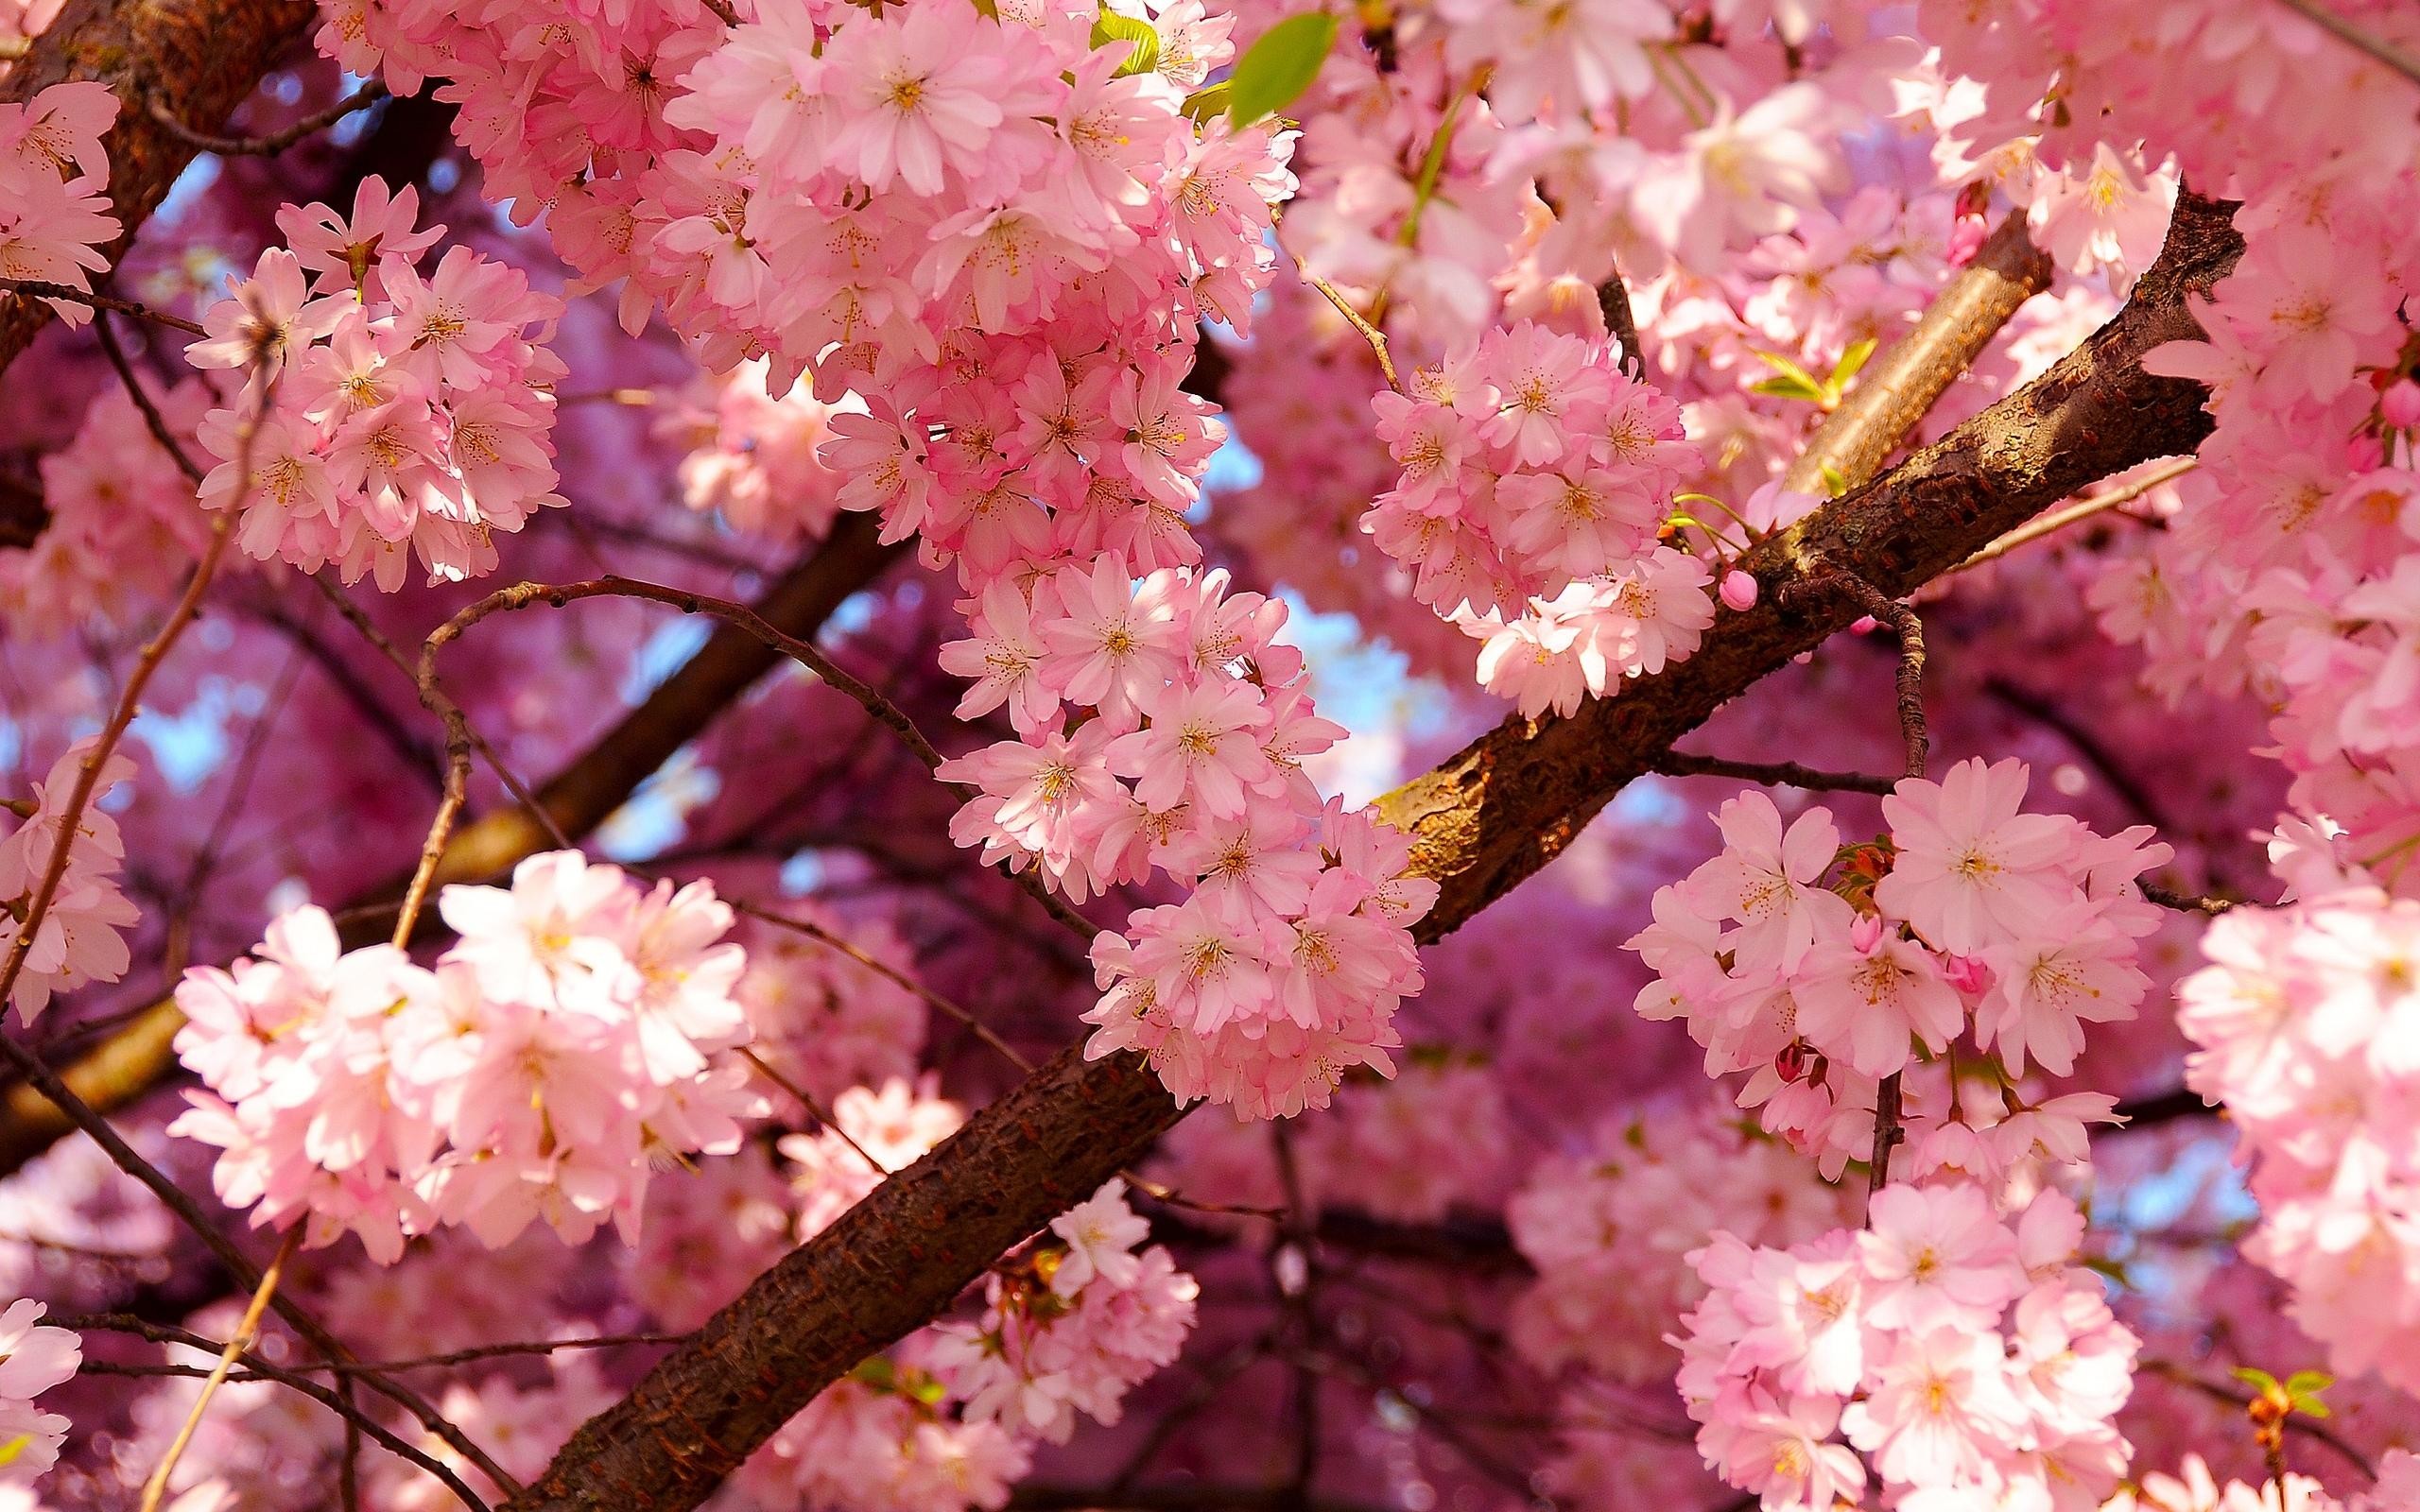 2560x1600 hd cherry blossom wallpapers hd desktop wallpapers background photos smart  phone background photos free images widescreen dual monitors colourful  ultra hd ...